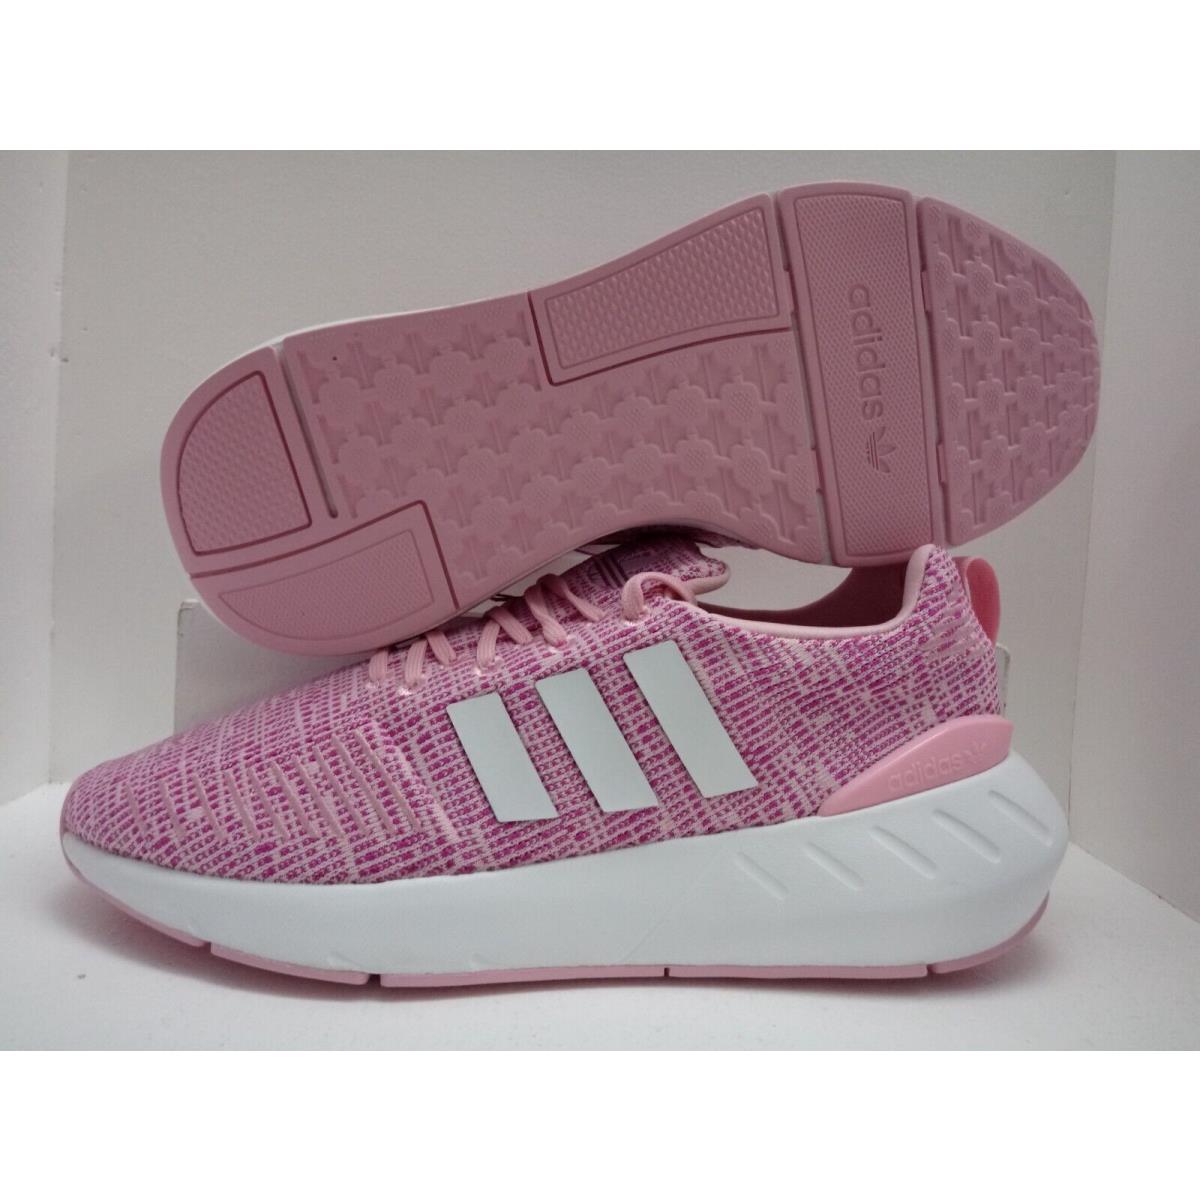 Adidas shoes  - PINK/WHITE 2